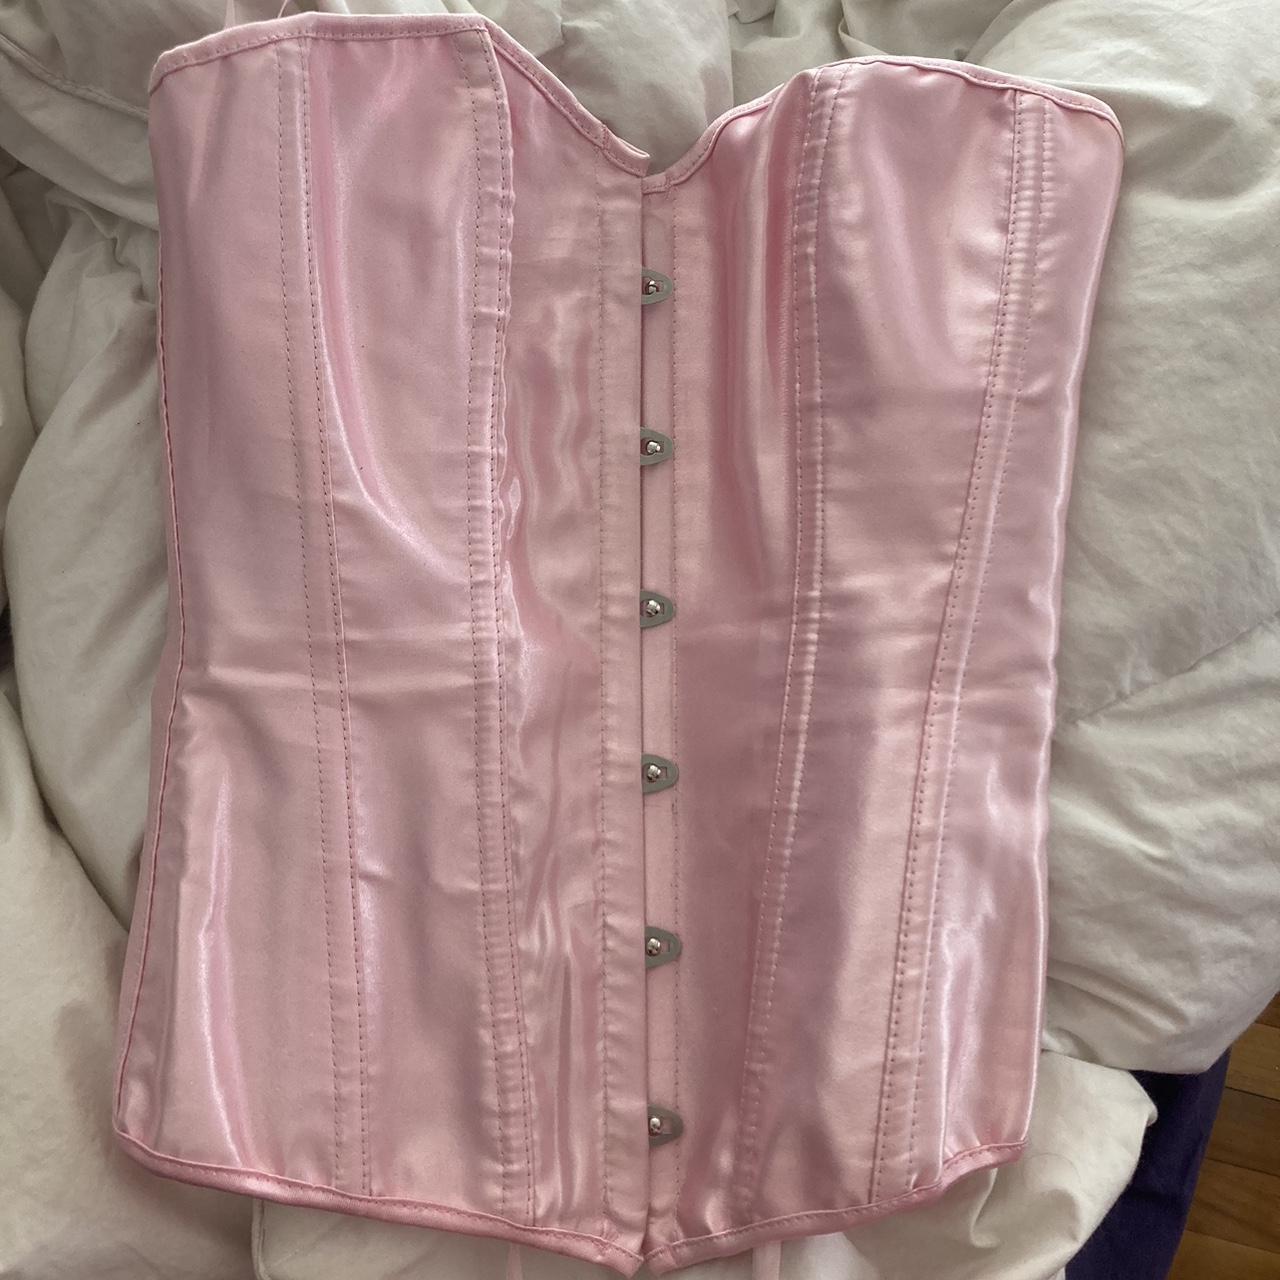 Light pink corset ✨ Worn only once, love it so much - Depop